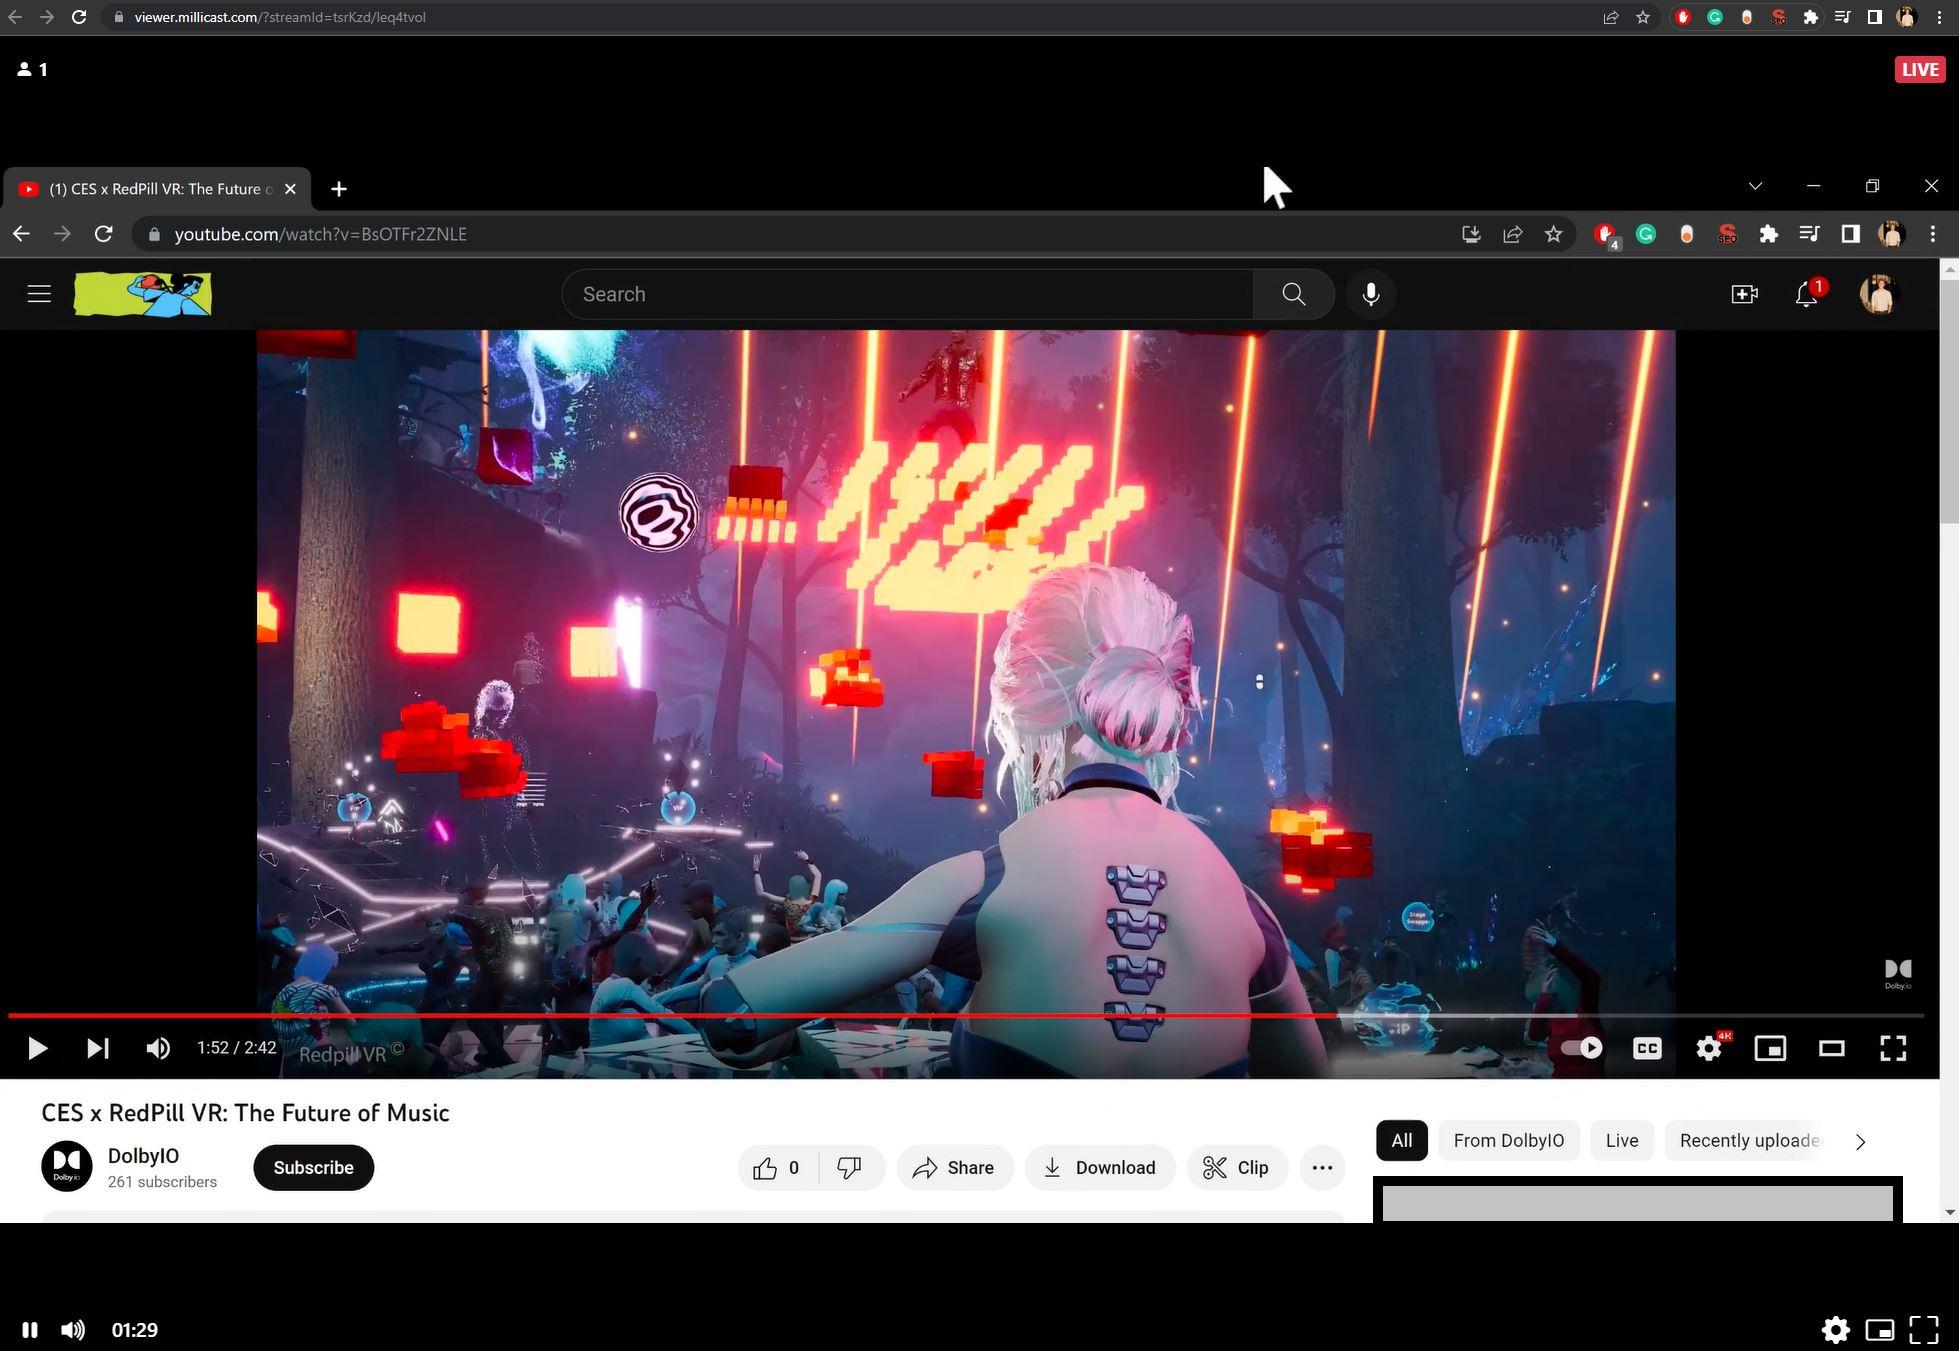 Image of an in-browser stream viewer playing a dolby.io youtube video. The video highlights how many people are watching the stream, whether the stream is live, and the player controls along the bottom. The content of the shared screen is irrelevant.